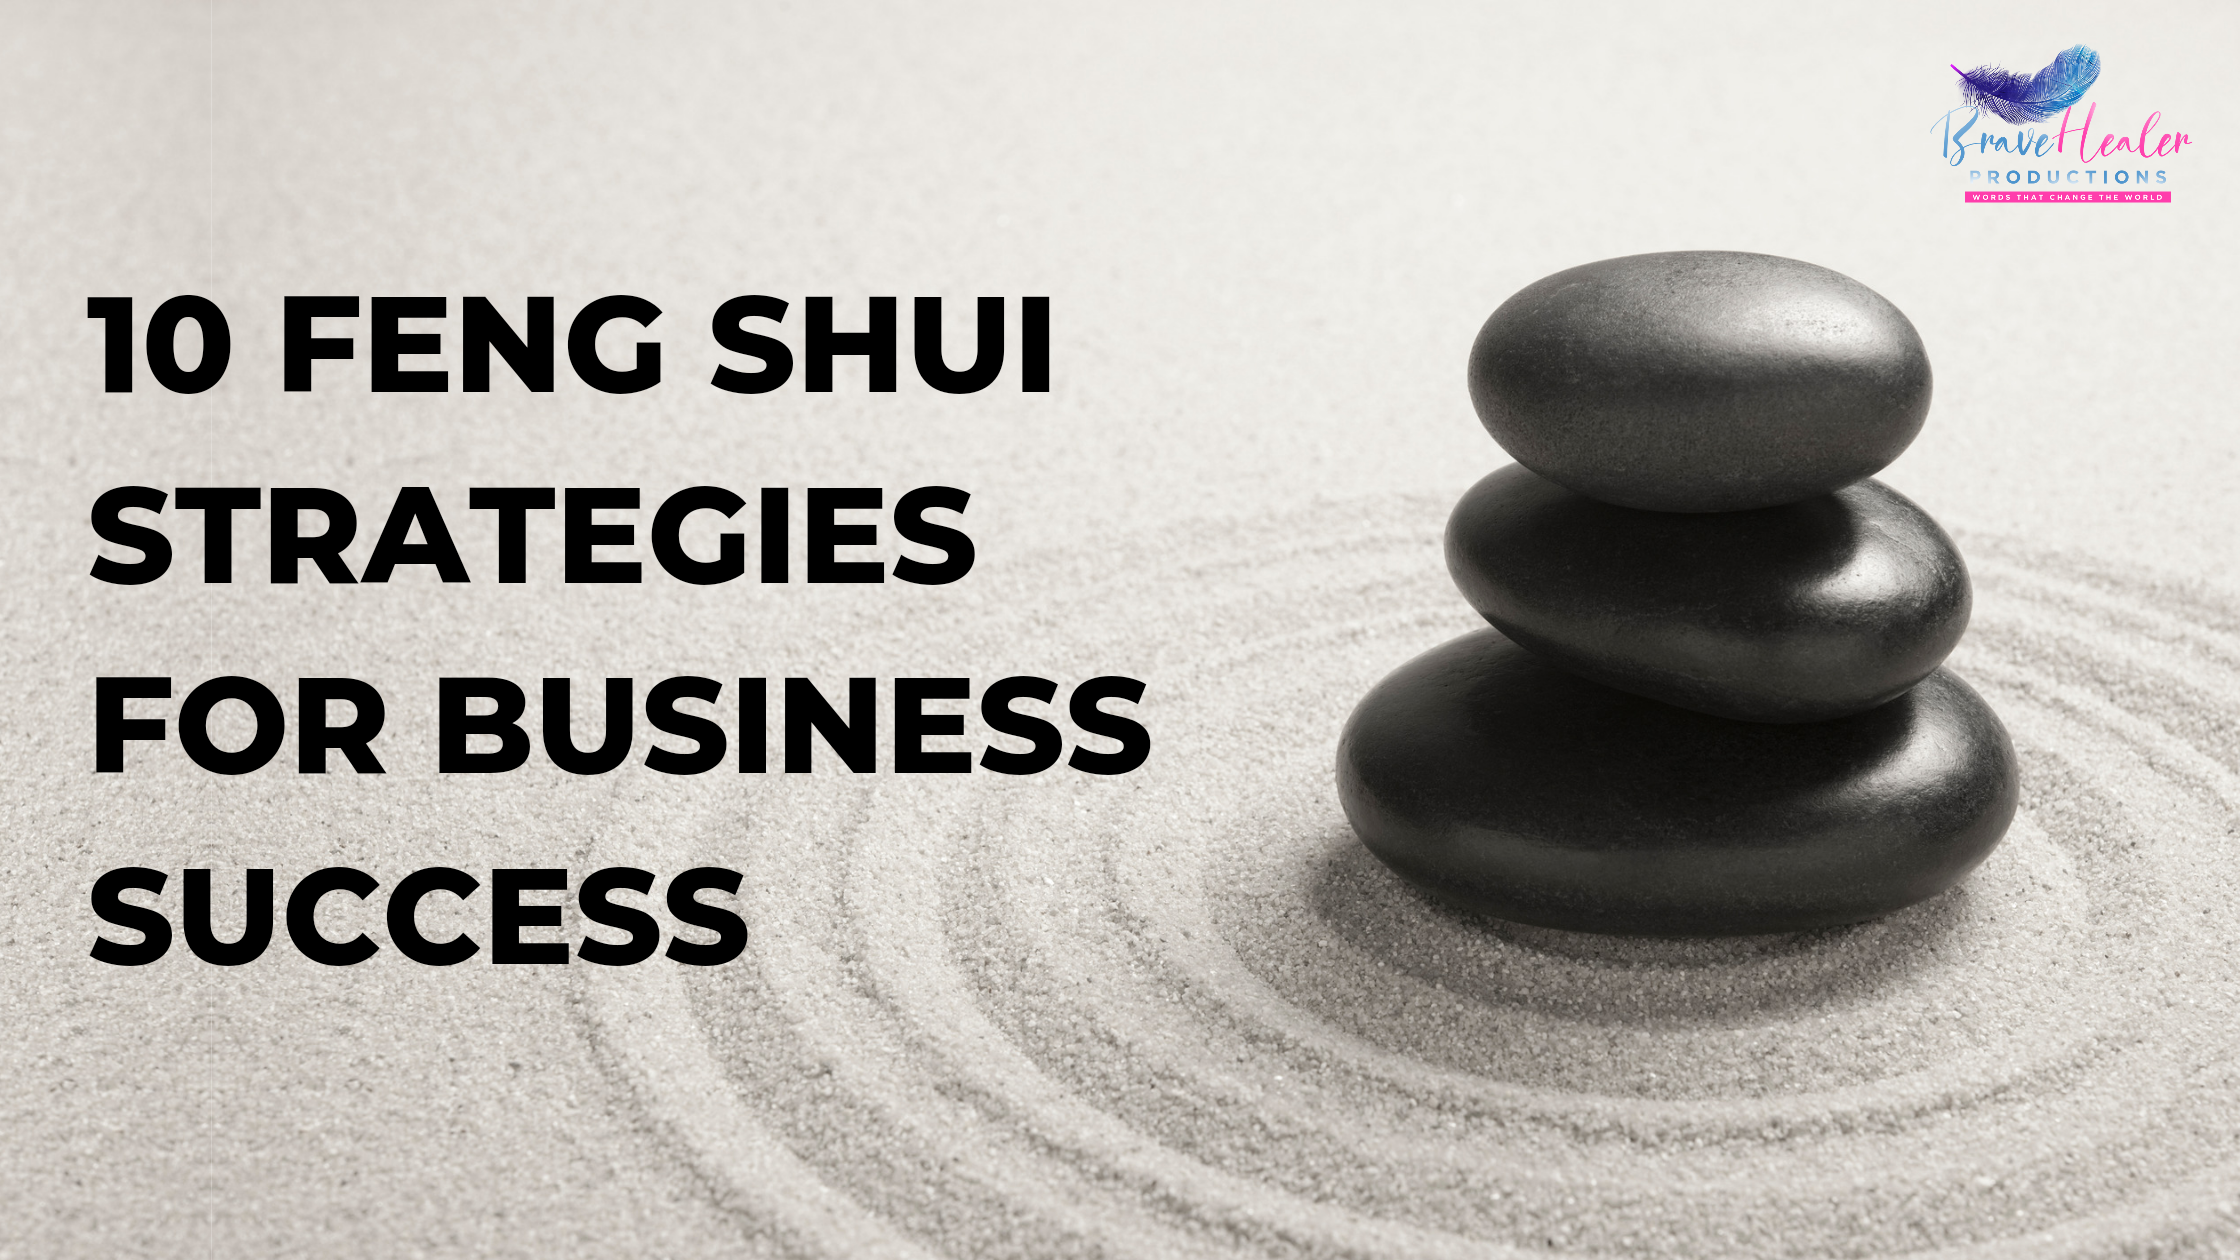 10-feng-shui-strategies-for-business-success